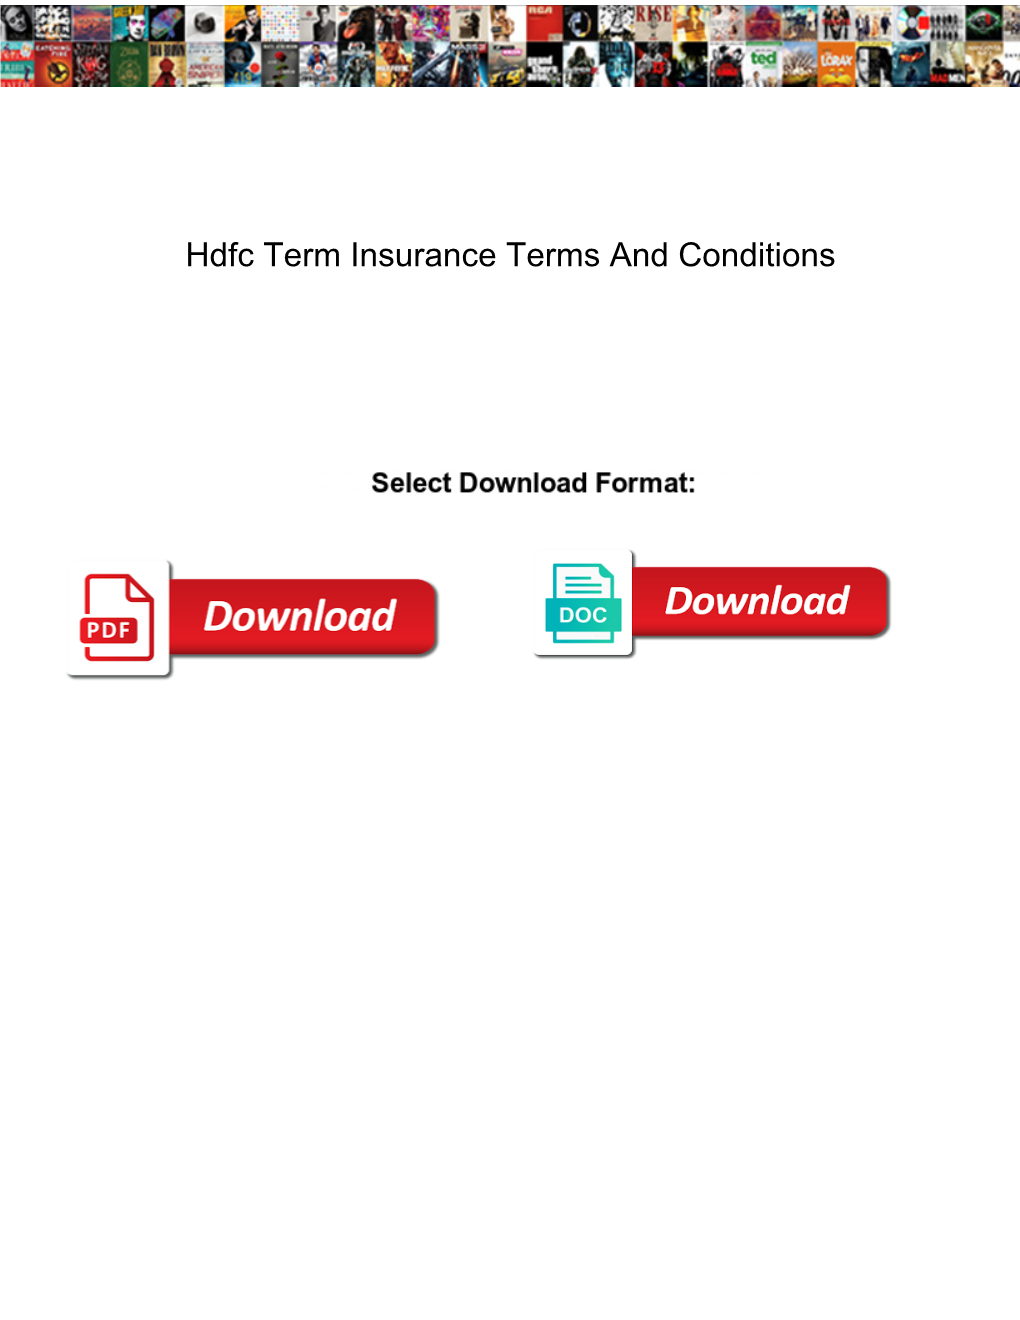 Hdfc Term Insurance Terms and Conditions